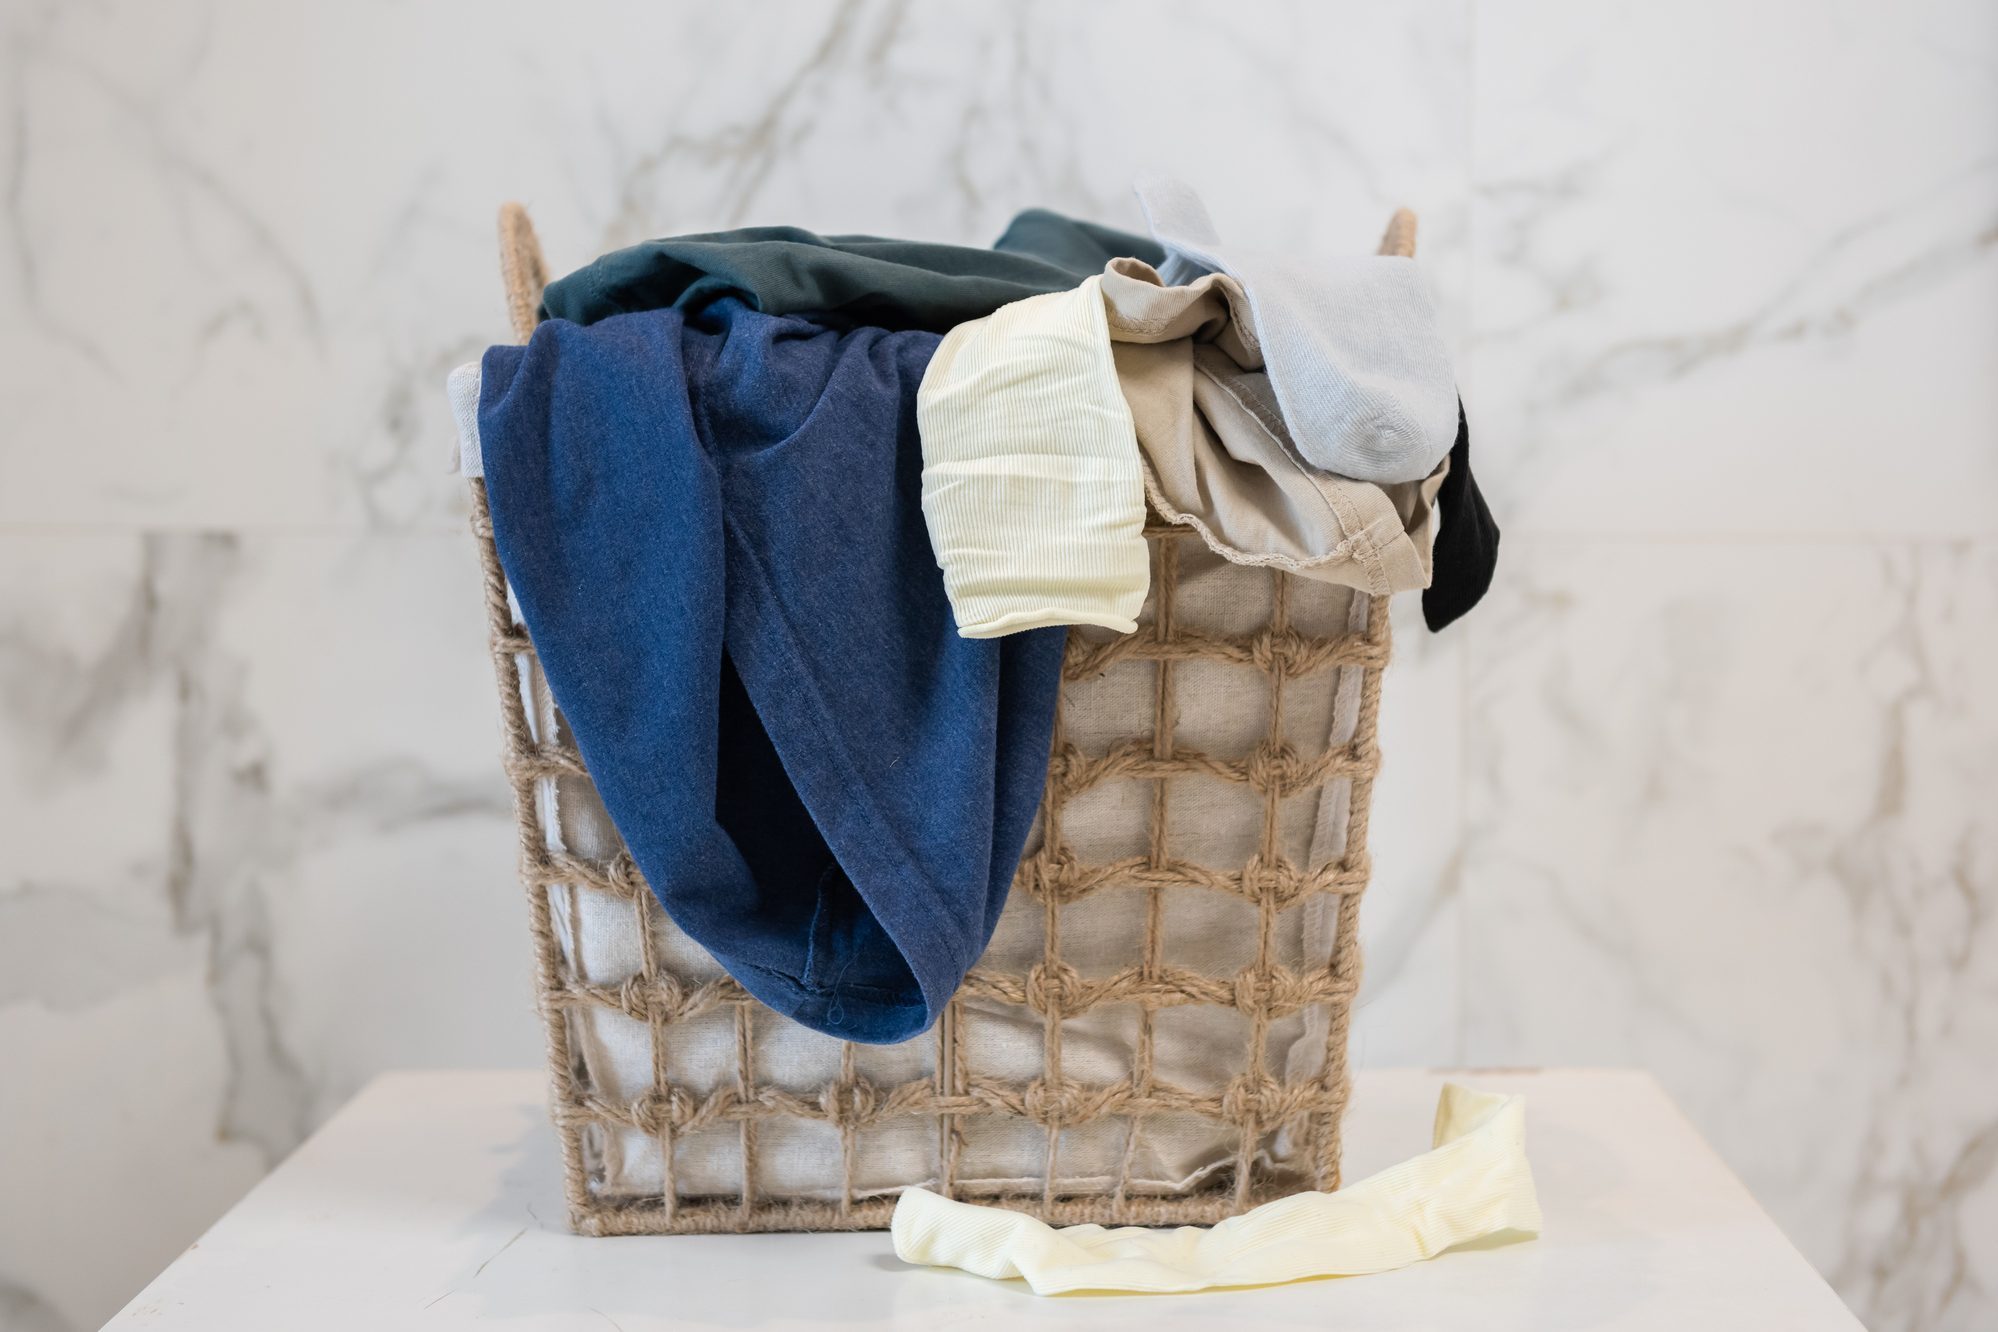 Dirty clothes in the laundry basket